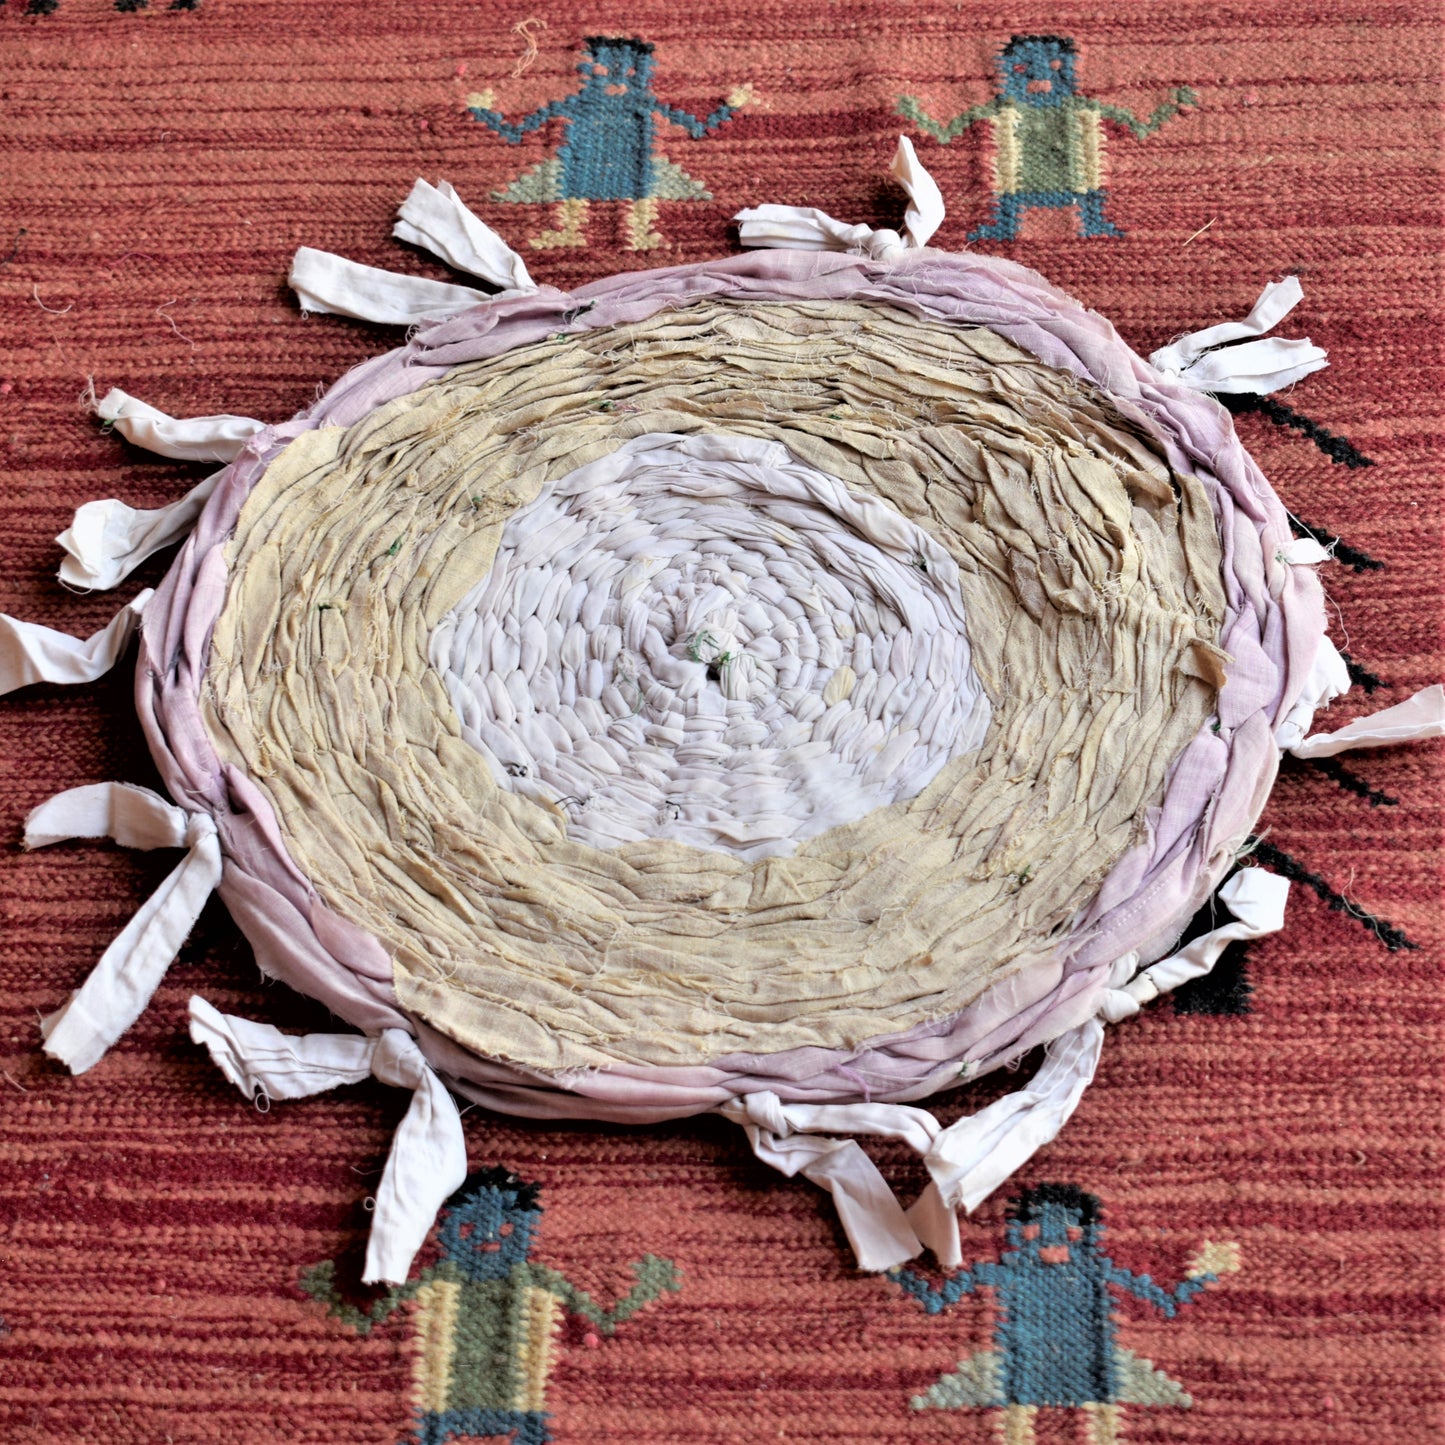 Recycled Handmade Round Asani and Foot Mat in Brown, White and Pink Patterns